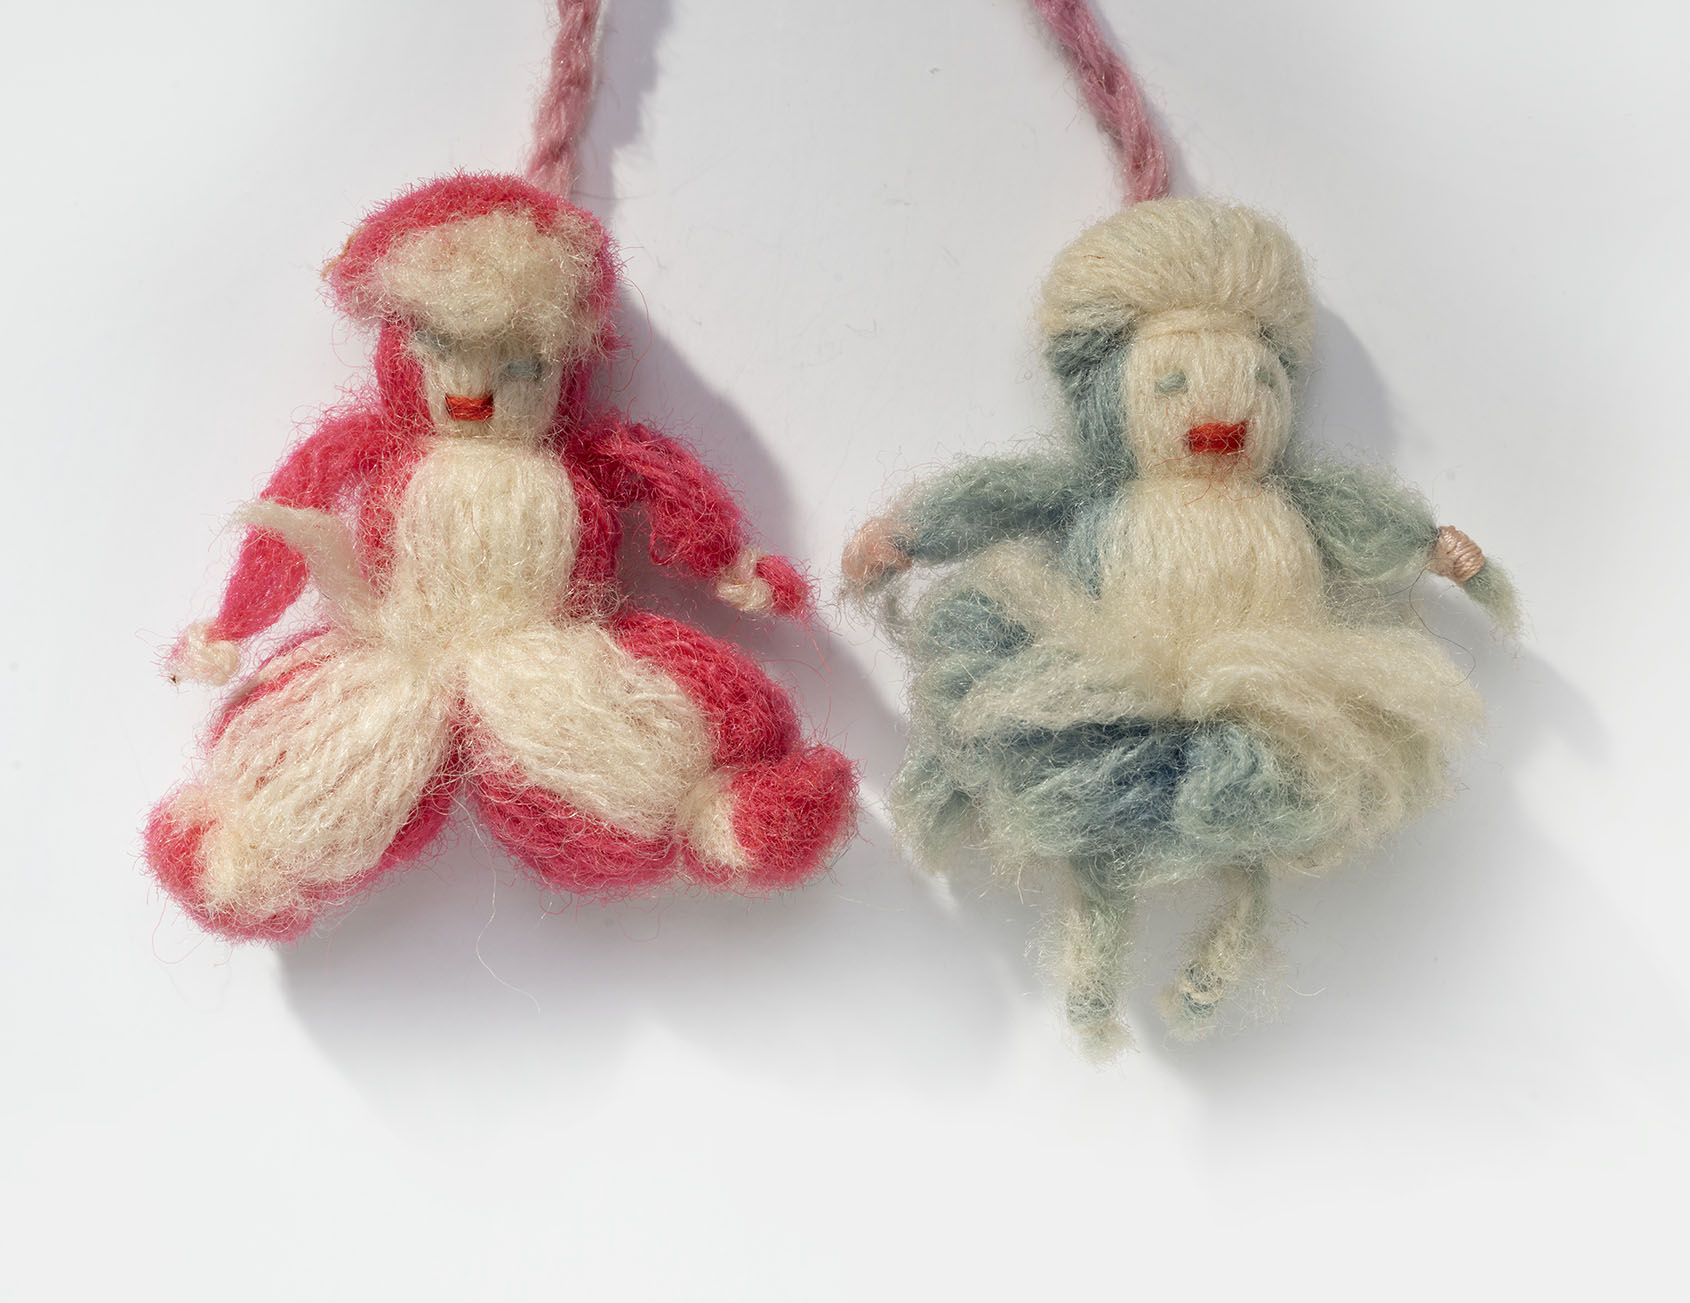 Two doll charms made out of yarn. Left doll charm is red and cream-colored yarn and wears pants. Right doll charm is blue and cream-colored yard and wears a skirt.